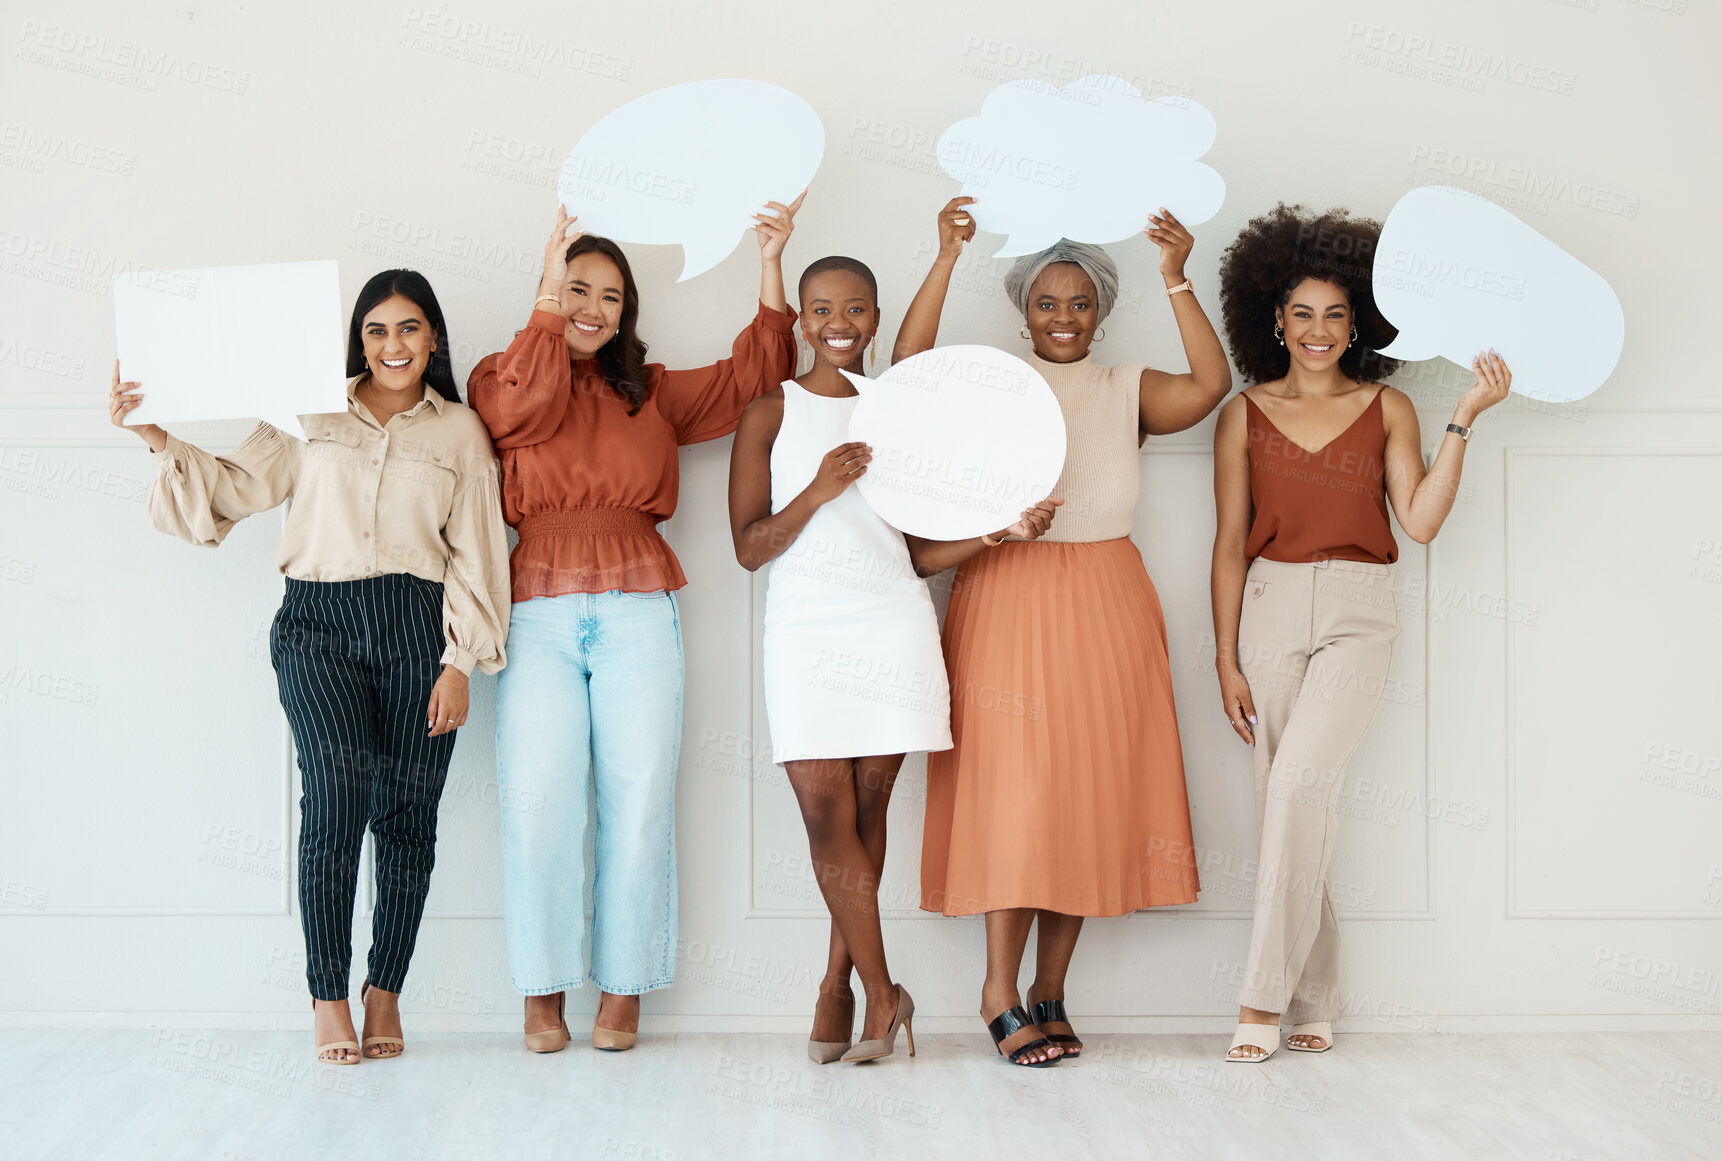 Buy stock photo Business woman, team and speech bubble in social media holding shapes or icons against a wall background. Portrait of happy women friends with poster shaped symbols for networking or communication